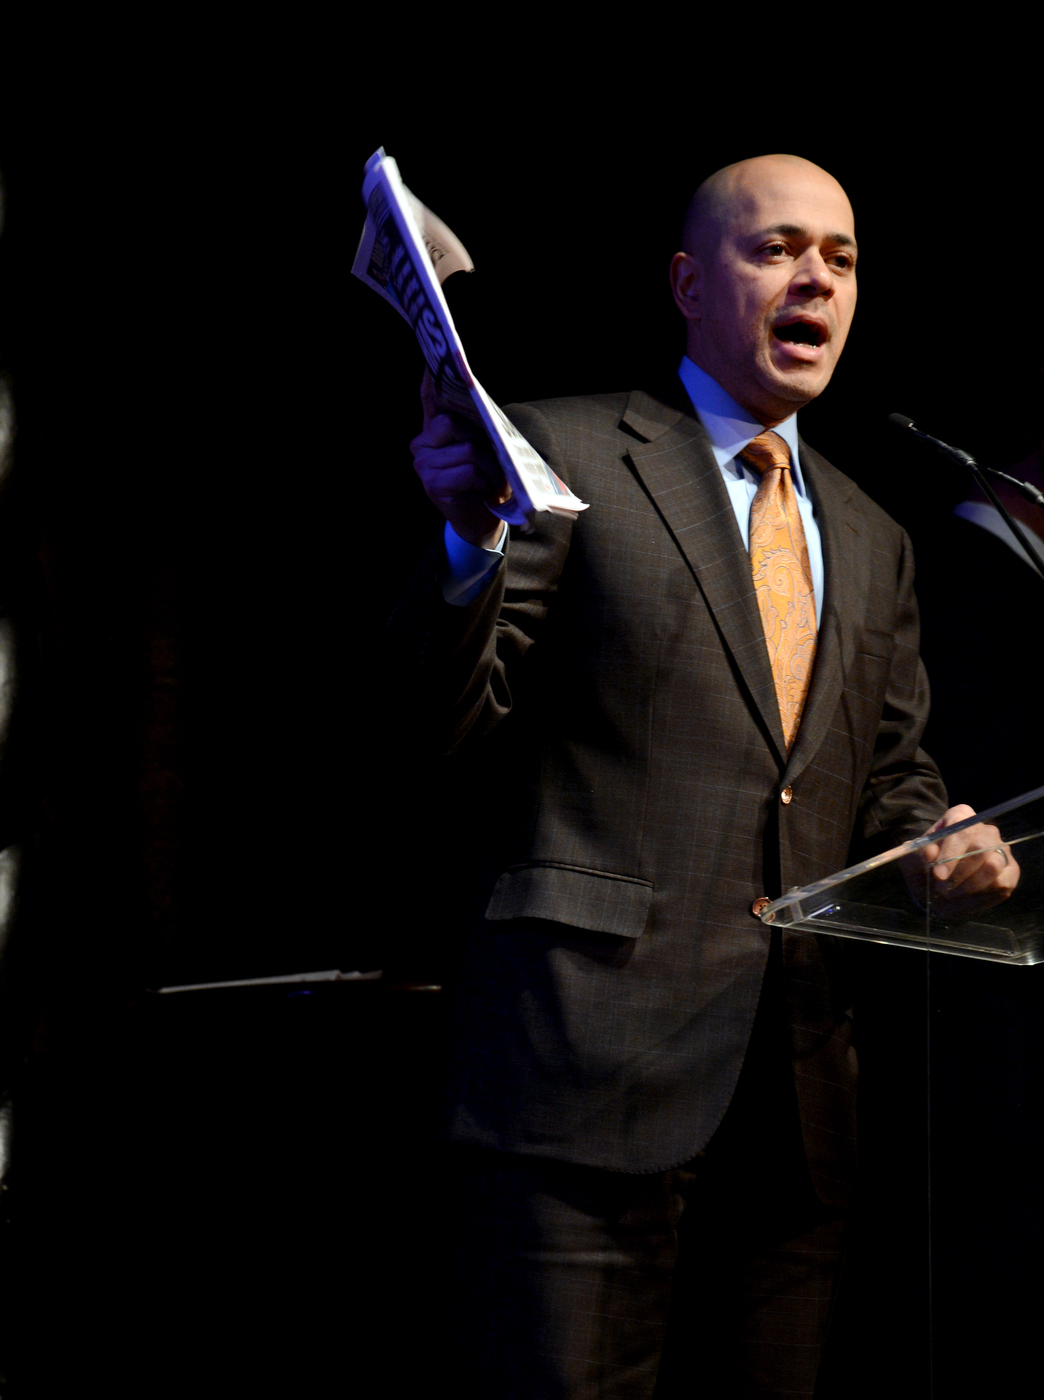 a man in suit and tie holding a newspaper on stage